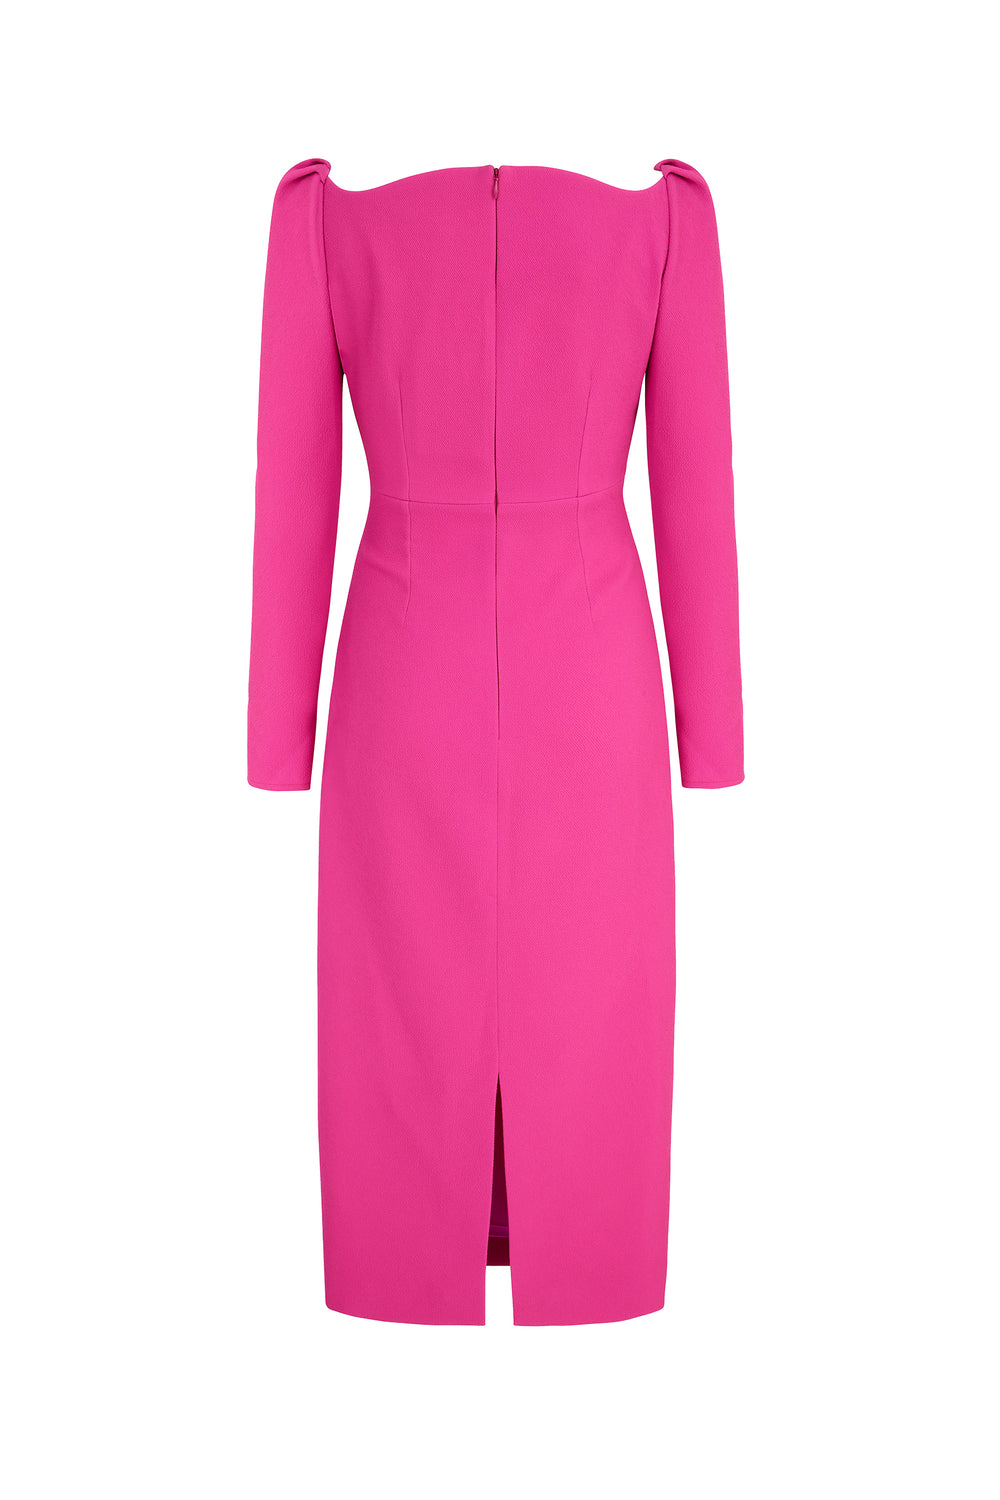 Halley Dress | Hot Pink Stretch Crepe | Suzannah London